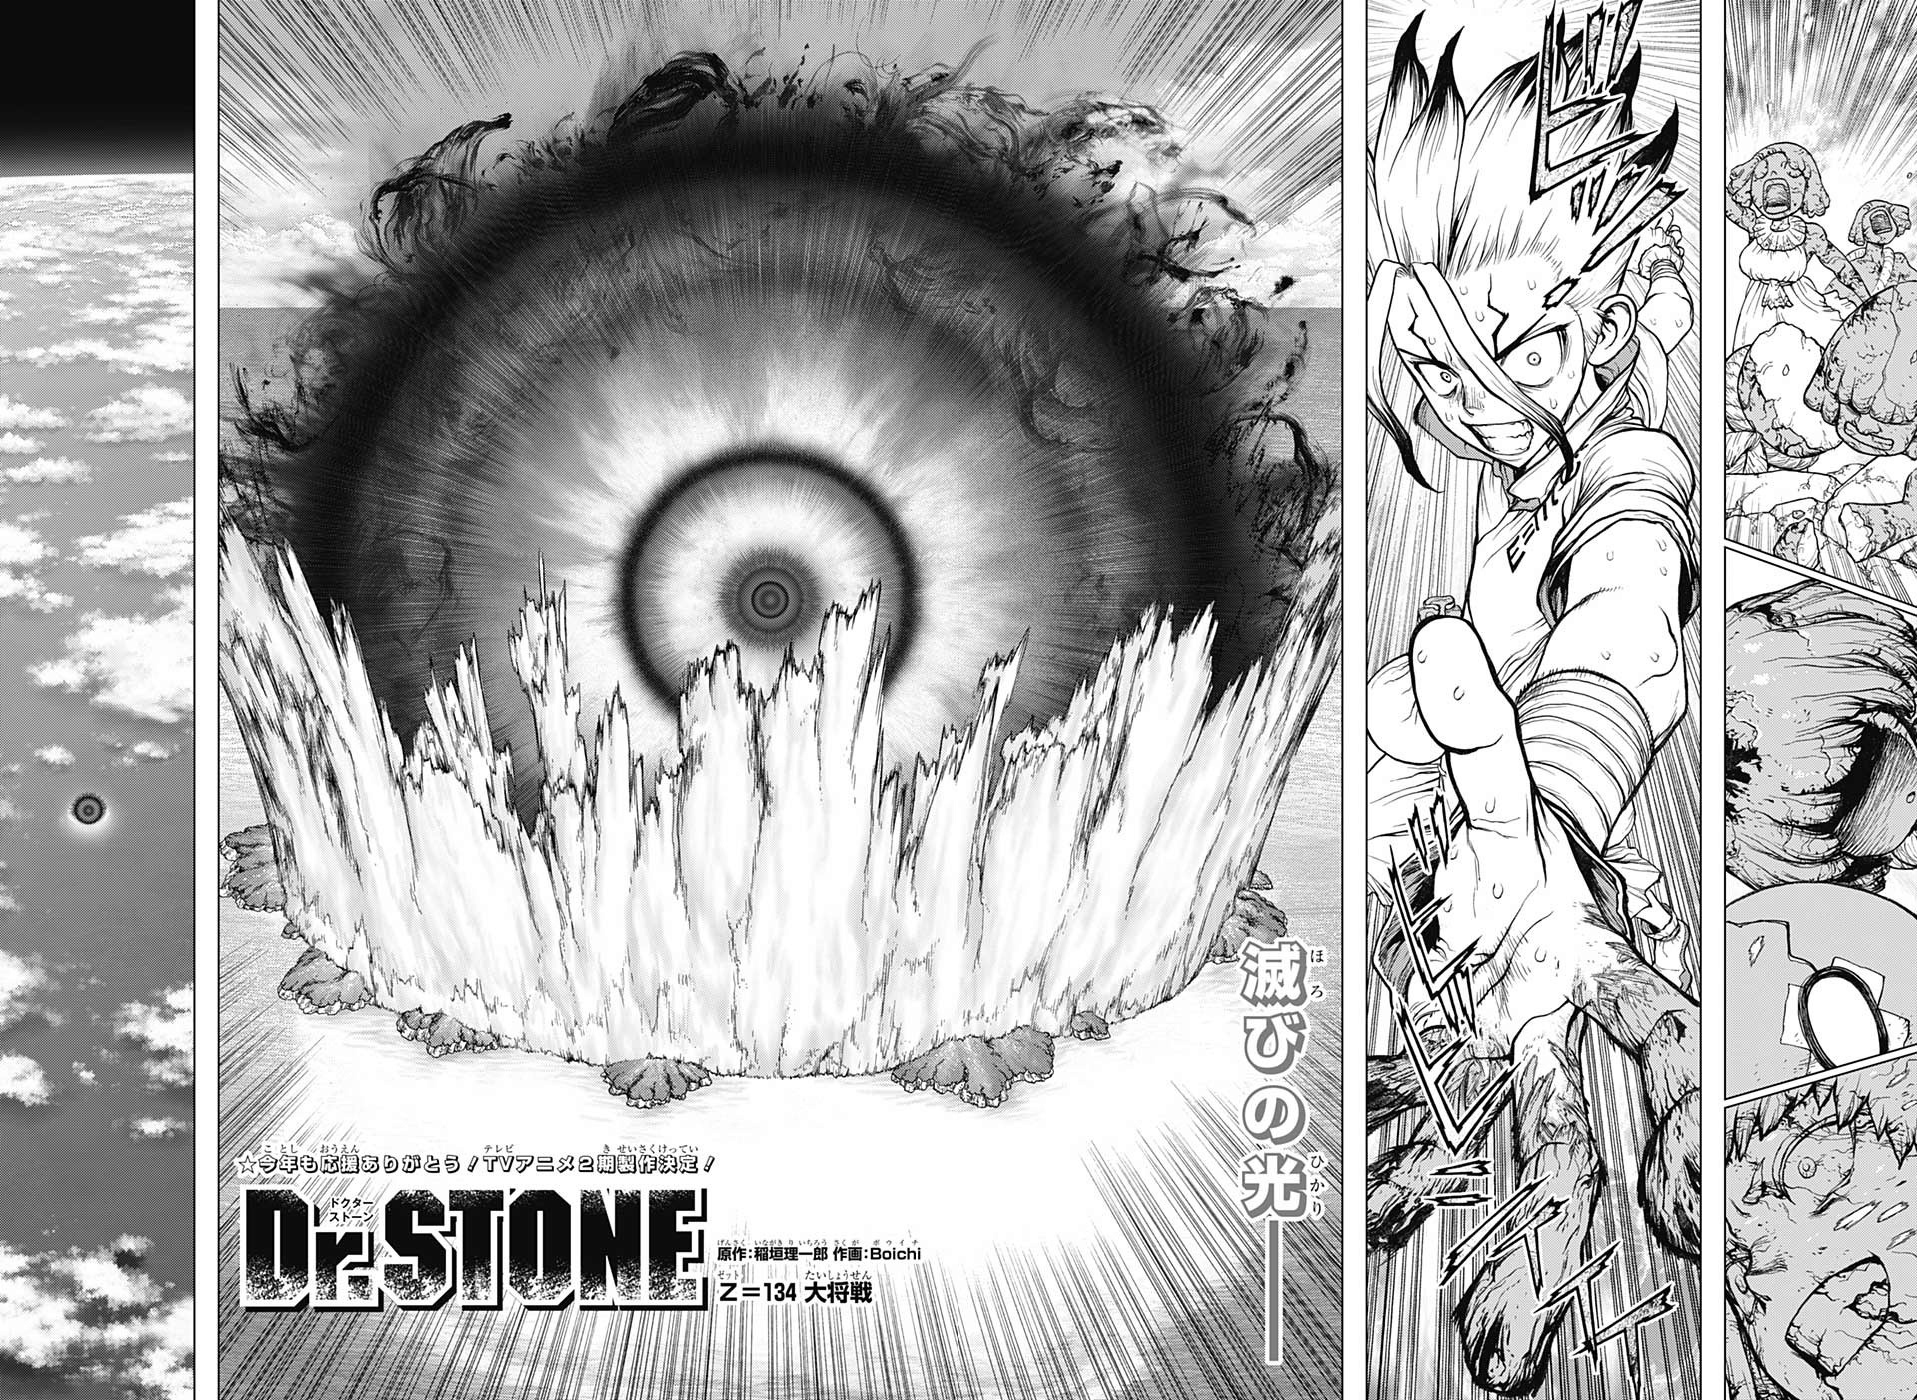 Category Volume 16 Chapters Dr Stone Wiki Fandom